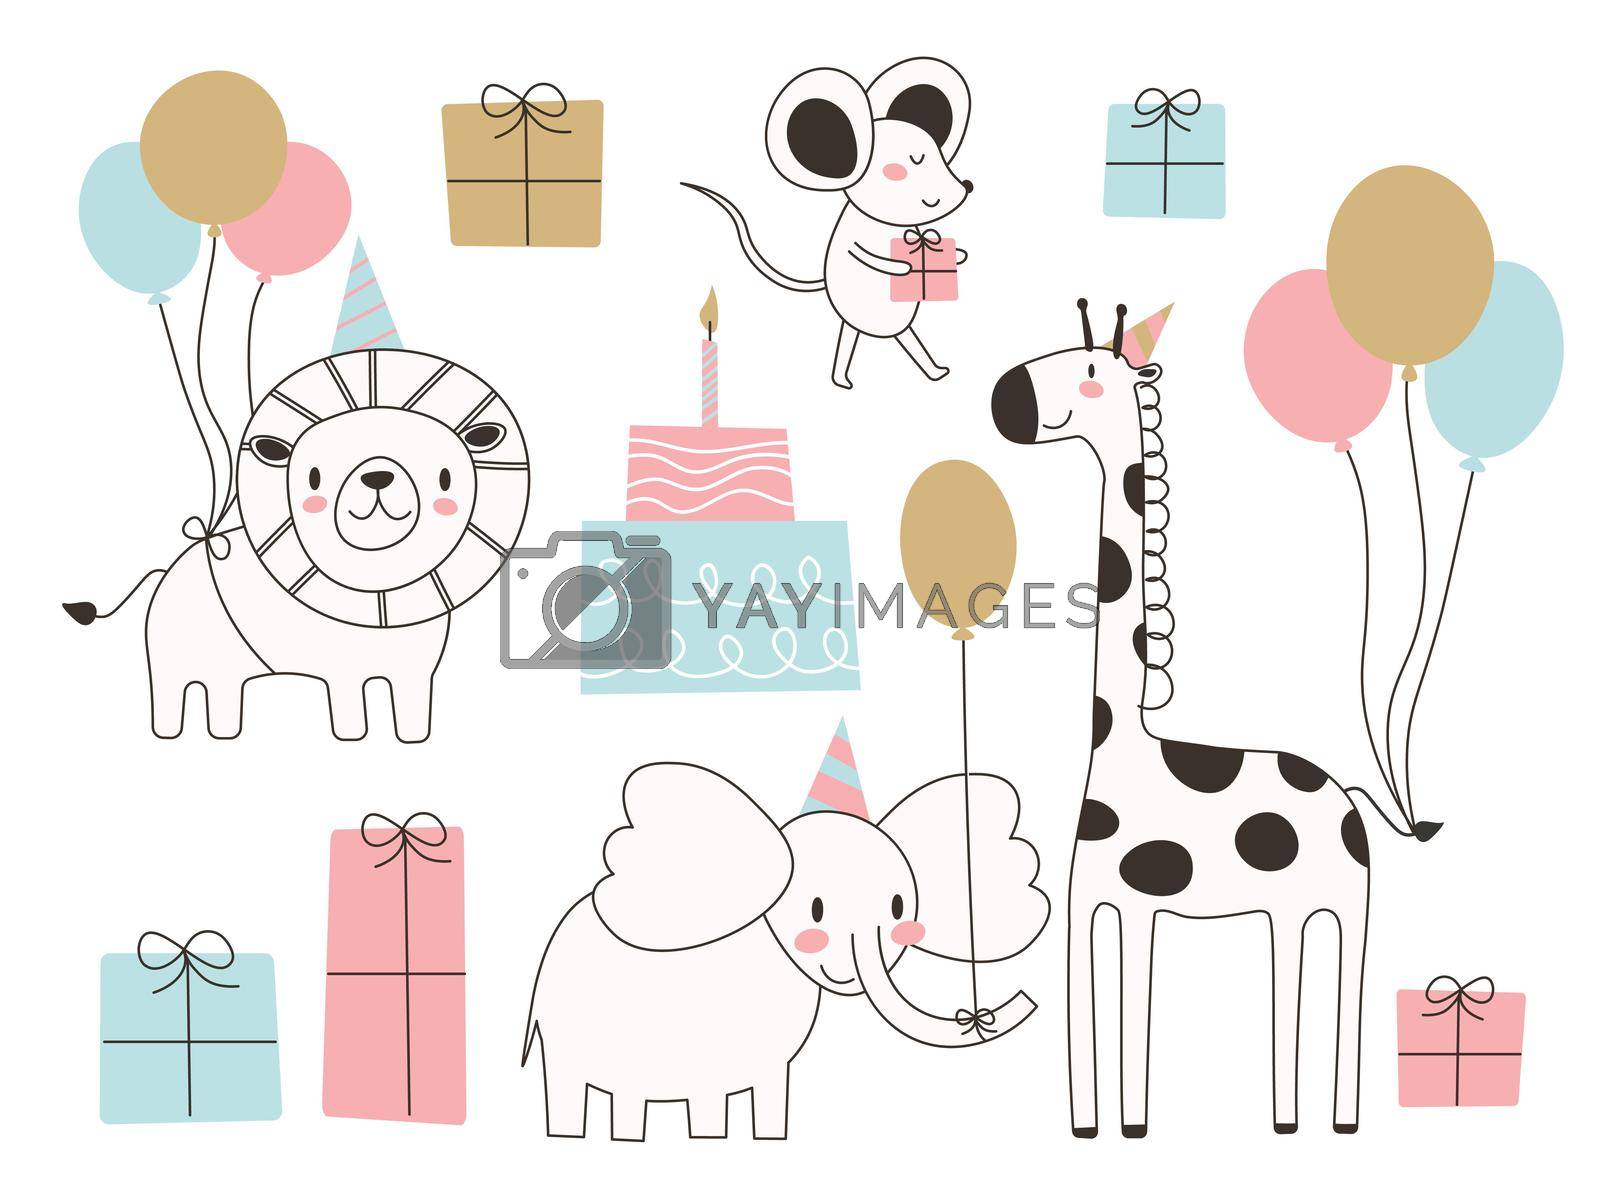 Royalty free image of Set of cute cartoon animals for birthday card design EPS by Alxyzt